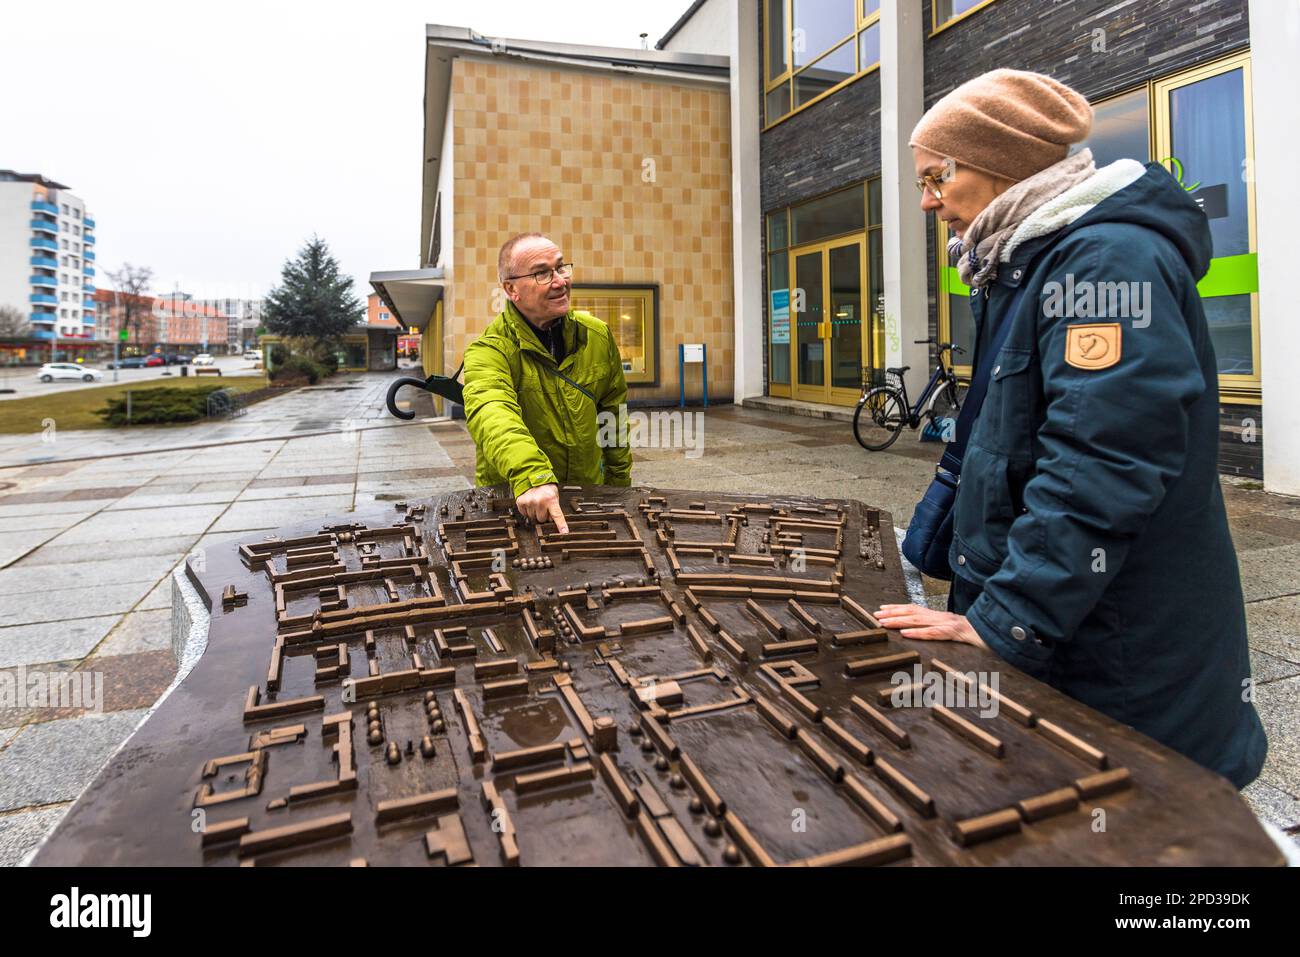 City guide Bernd Geller explains the layout of the city on a model. The basis of the urban planning by architect Kurt W. Leucht is the design in four residential complexes with a center and facilities for common use. Eisenhüttenstadt, Germany Stock Photo